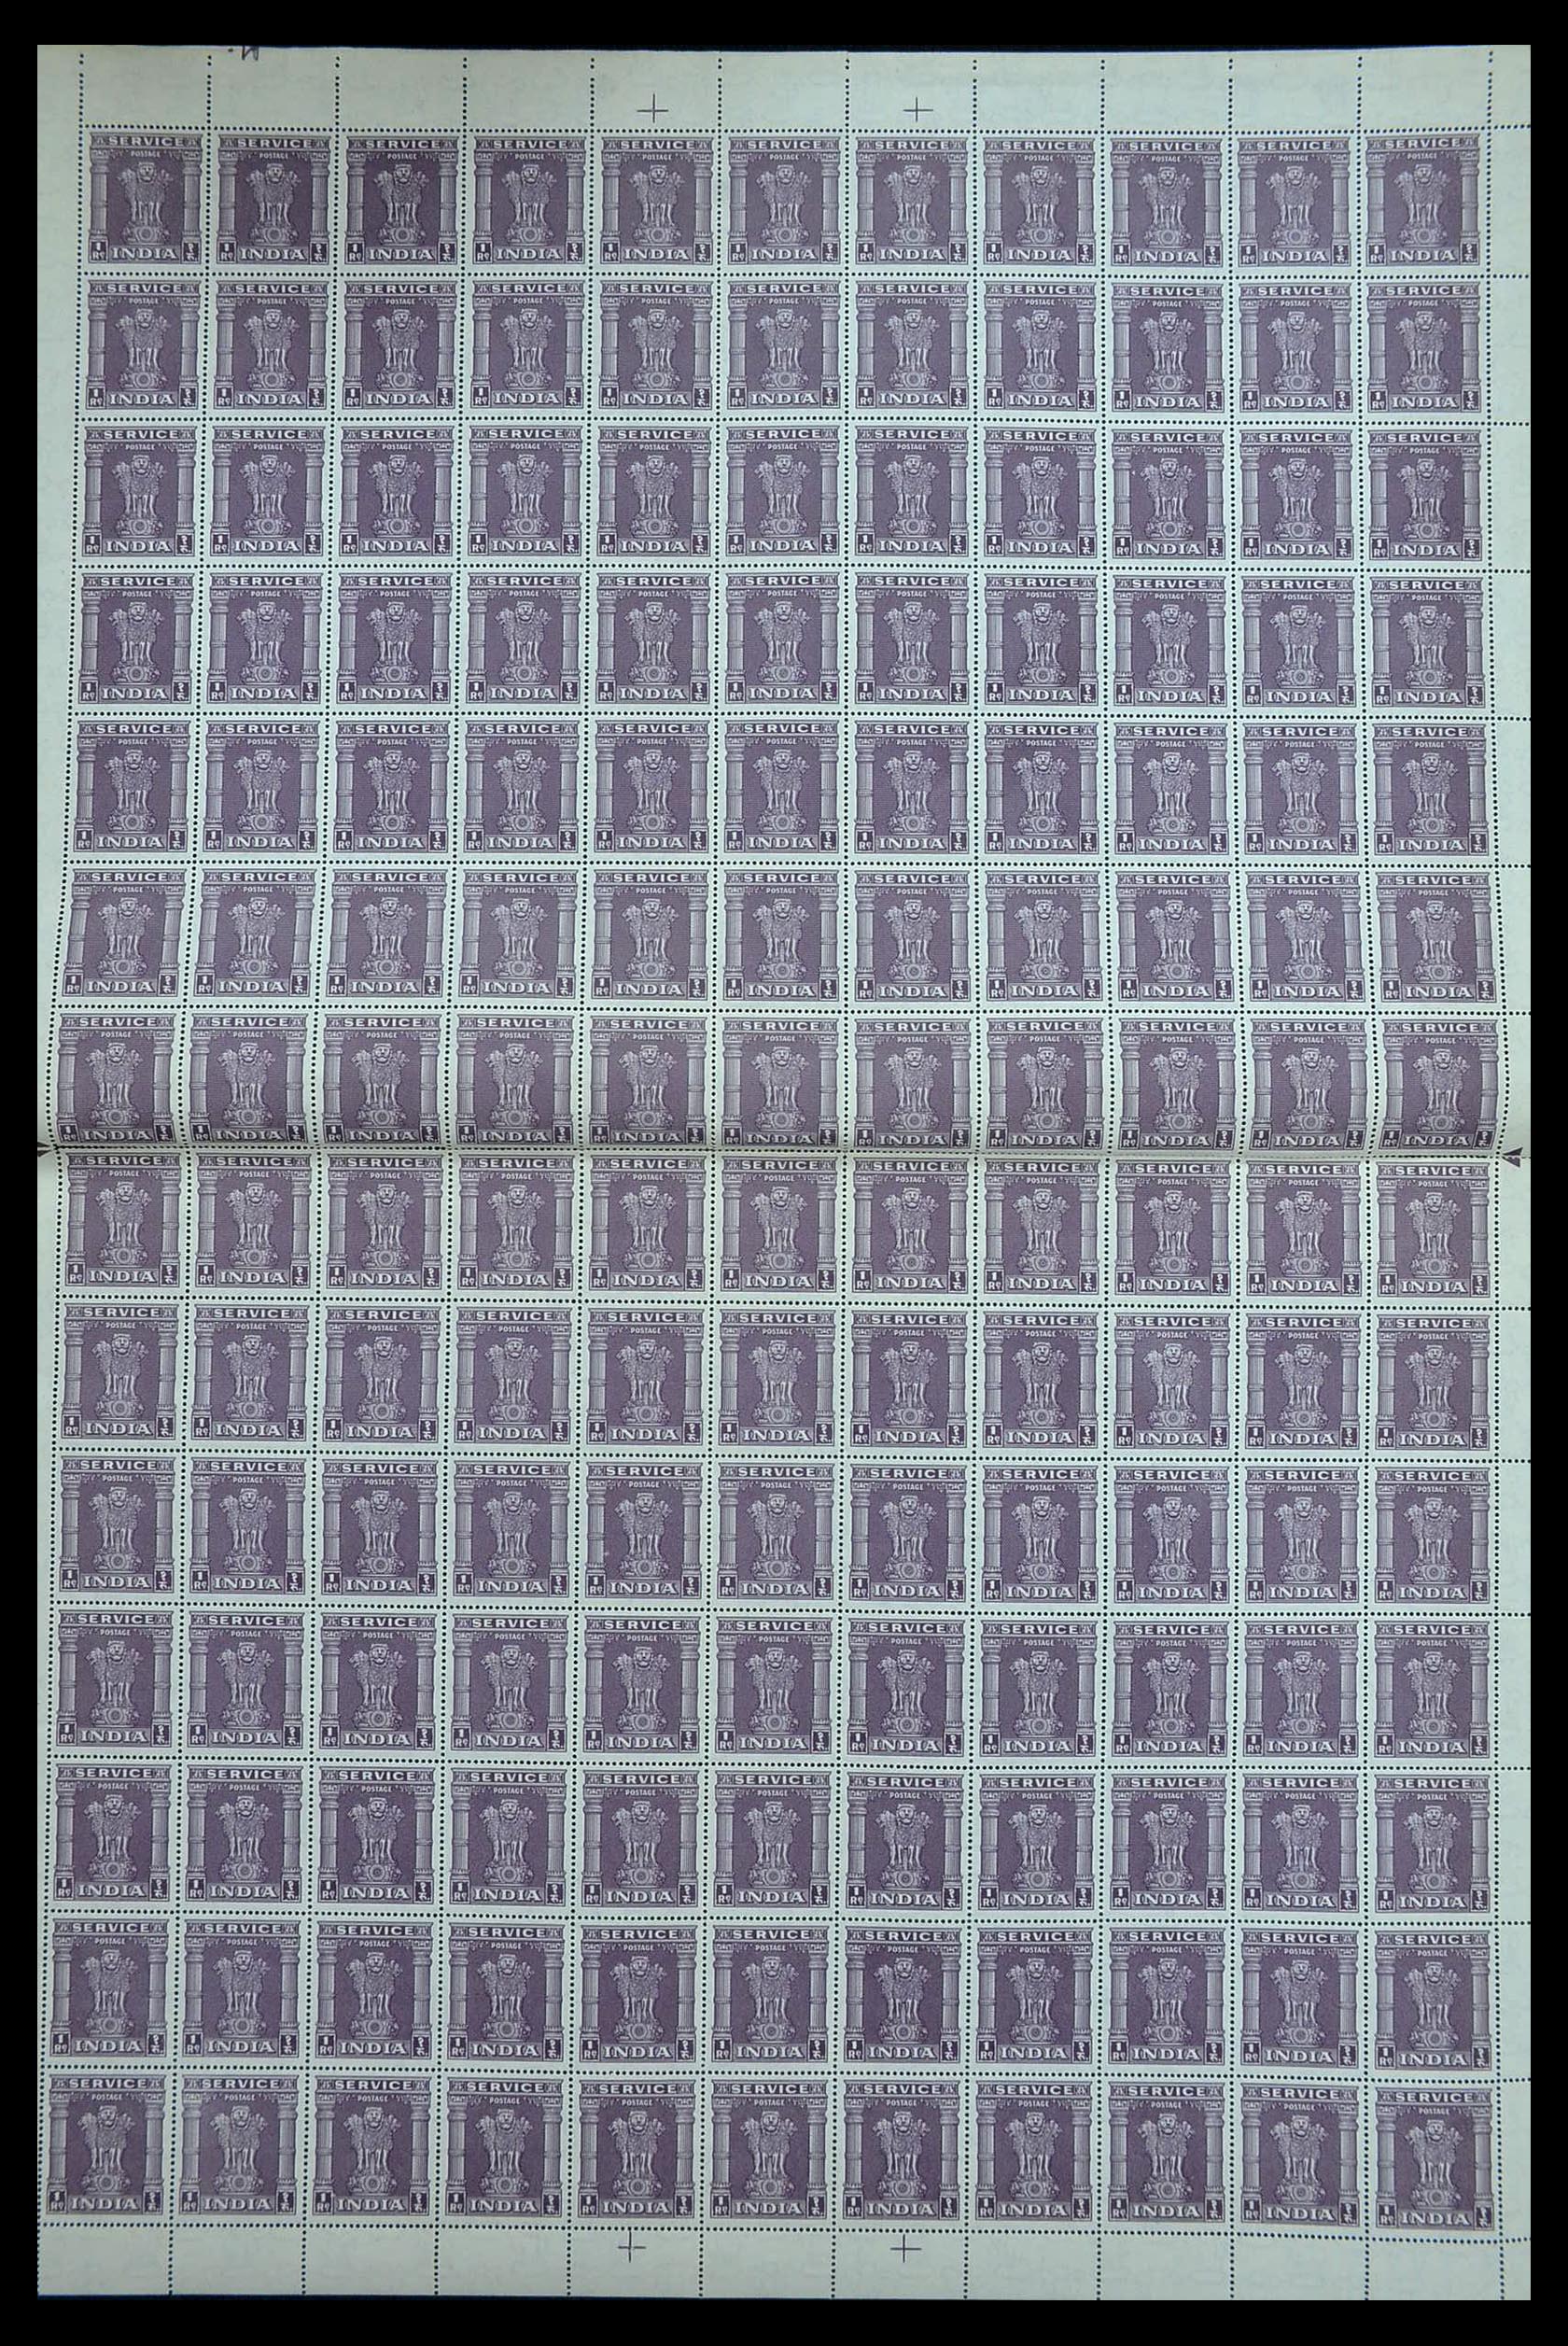 34016 063 - Stamp collection 34016 India service stamps 1958-1971.